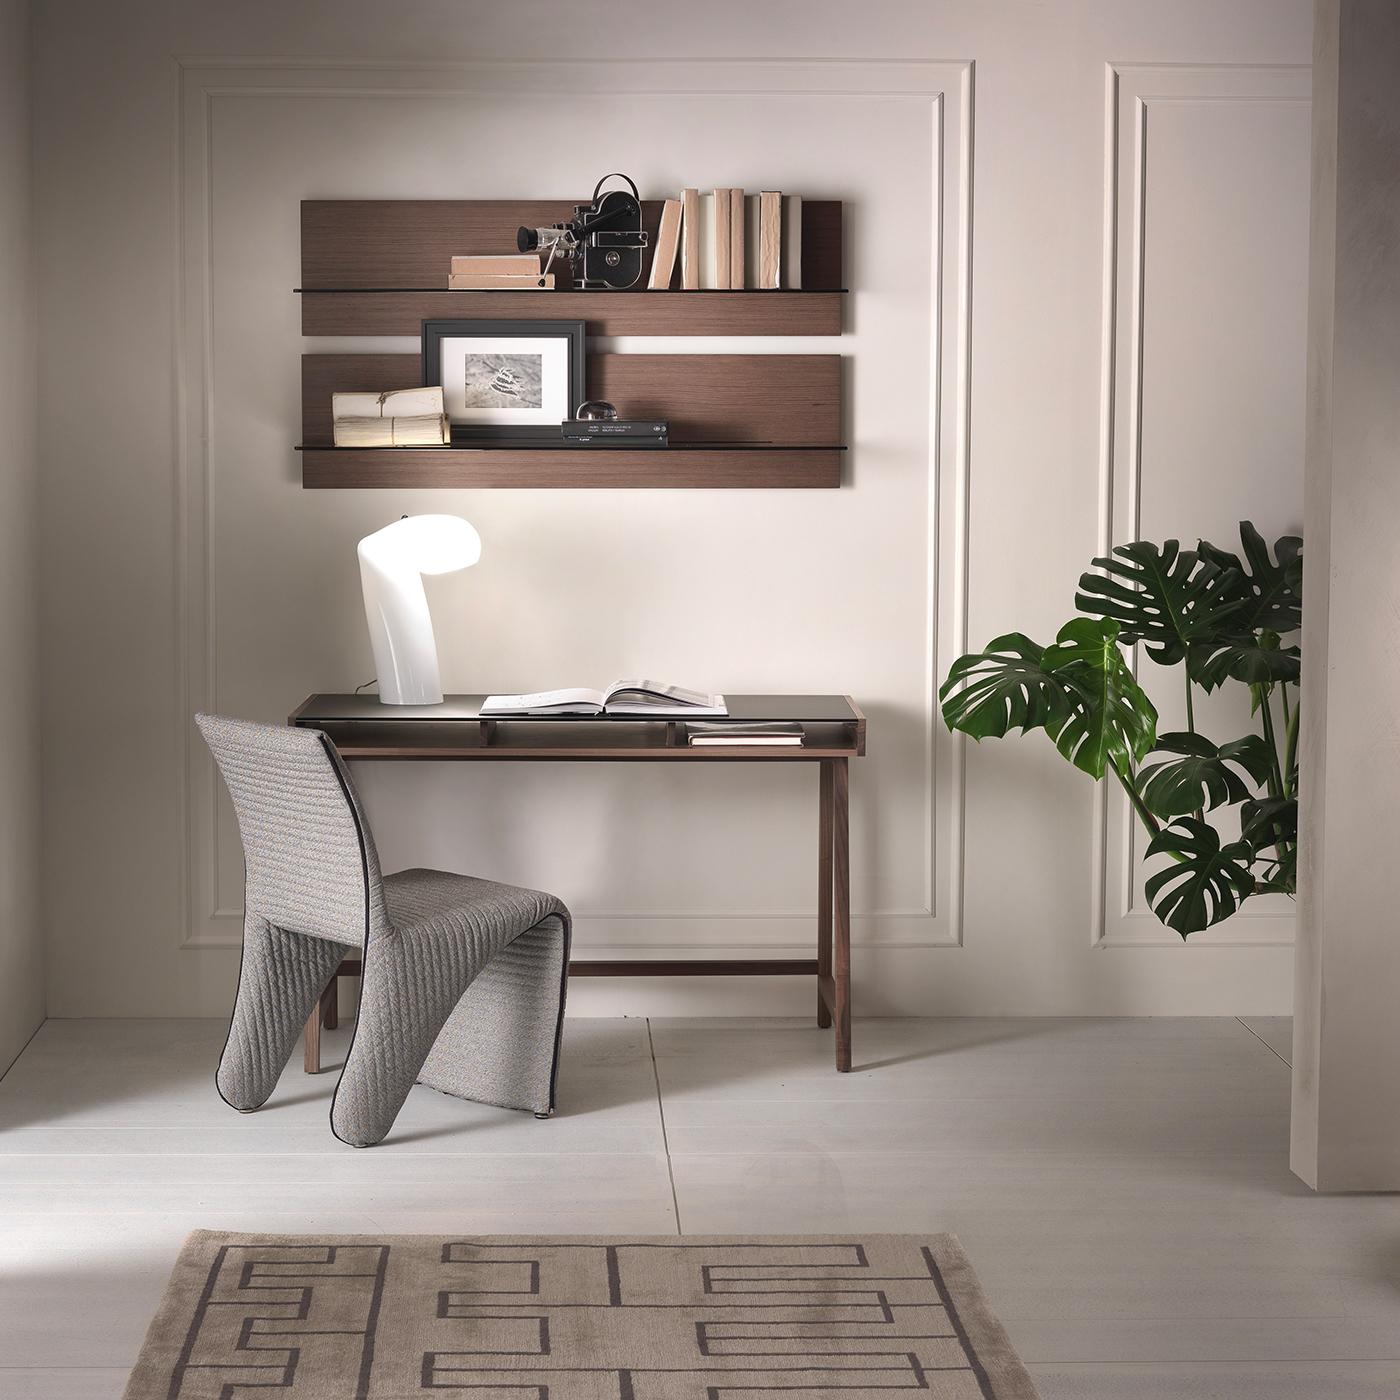 Prized materials and clean aesthetic effortlessly merge in this exquisite writing desk by Fabio Rebosio. The structure is crafted of Canaletto walnut wood and enriched with a matte bronze-lacquered tempered glass top, while the shelf features a